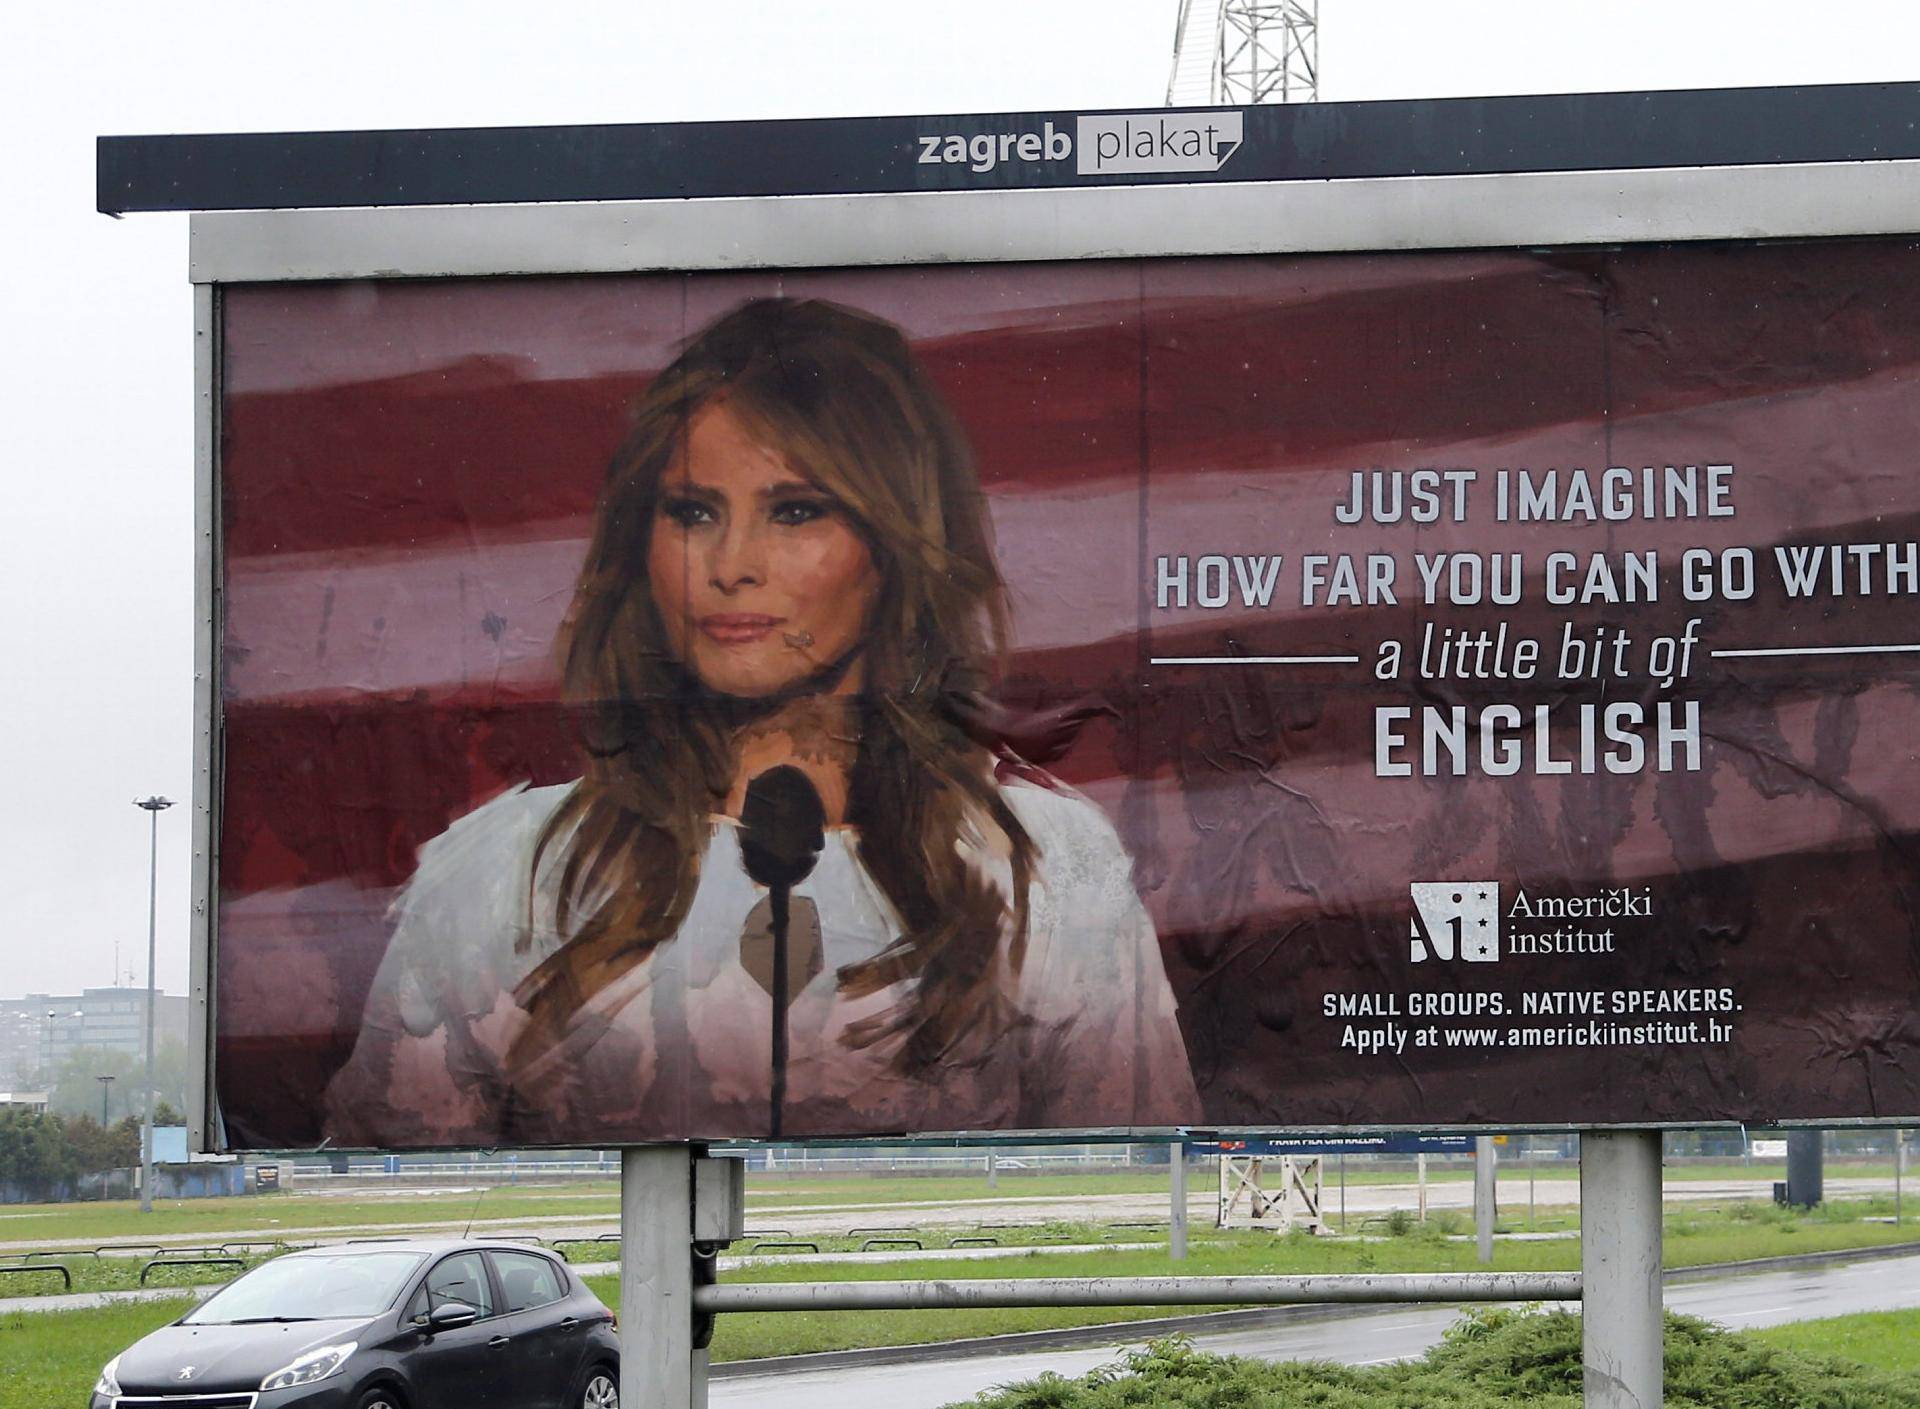 Cars drive near a billboard advertising a language school with the image of U.S. first lady Melania Trump in Zagreb, Croatia